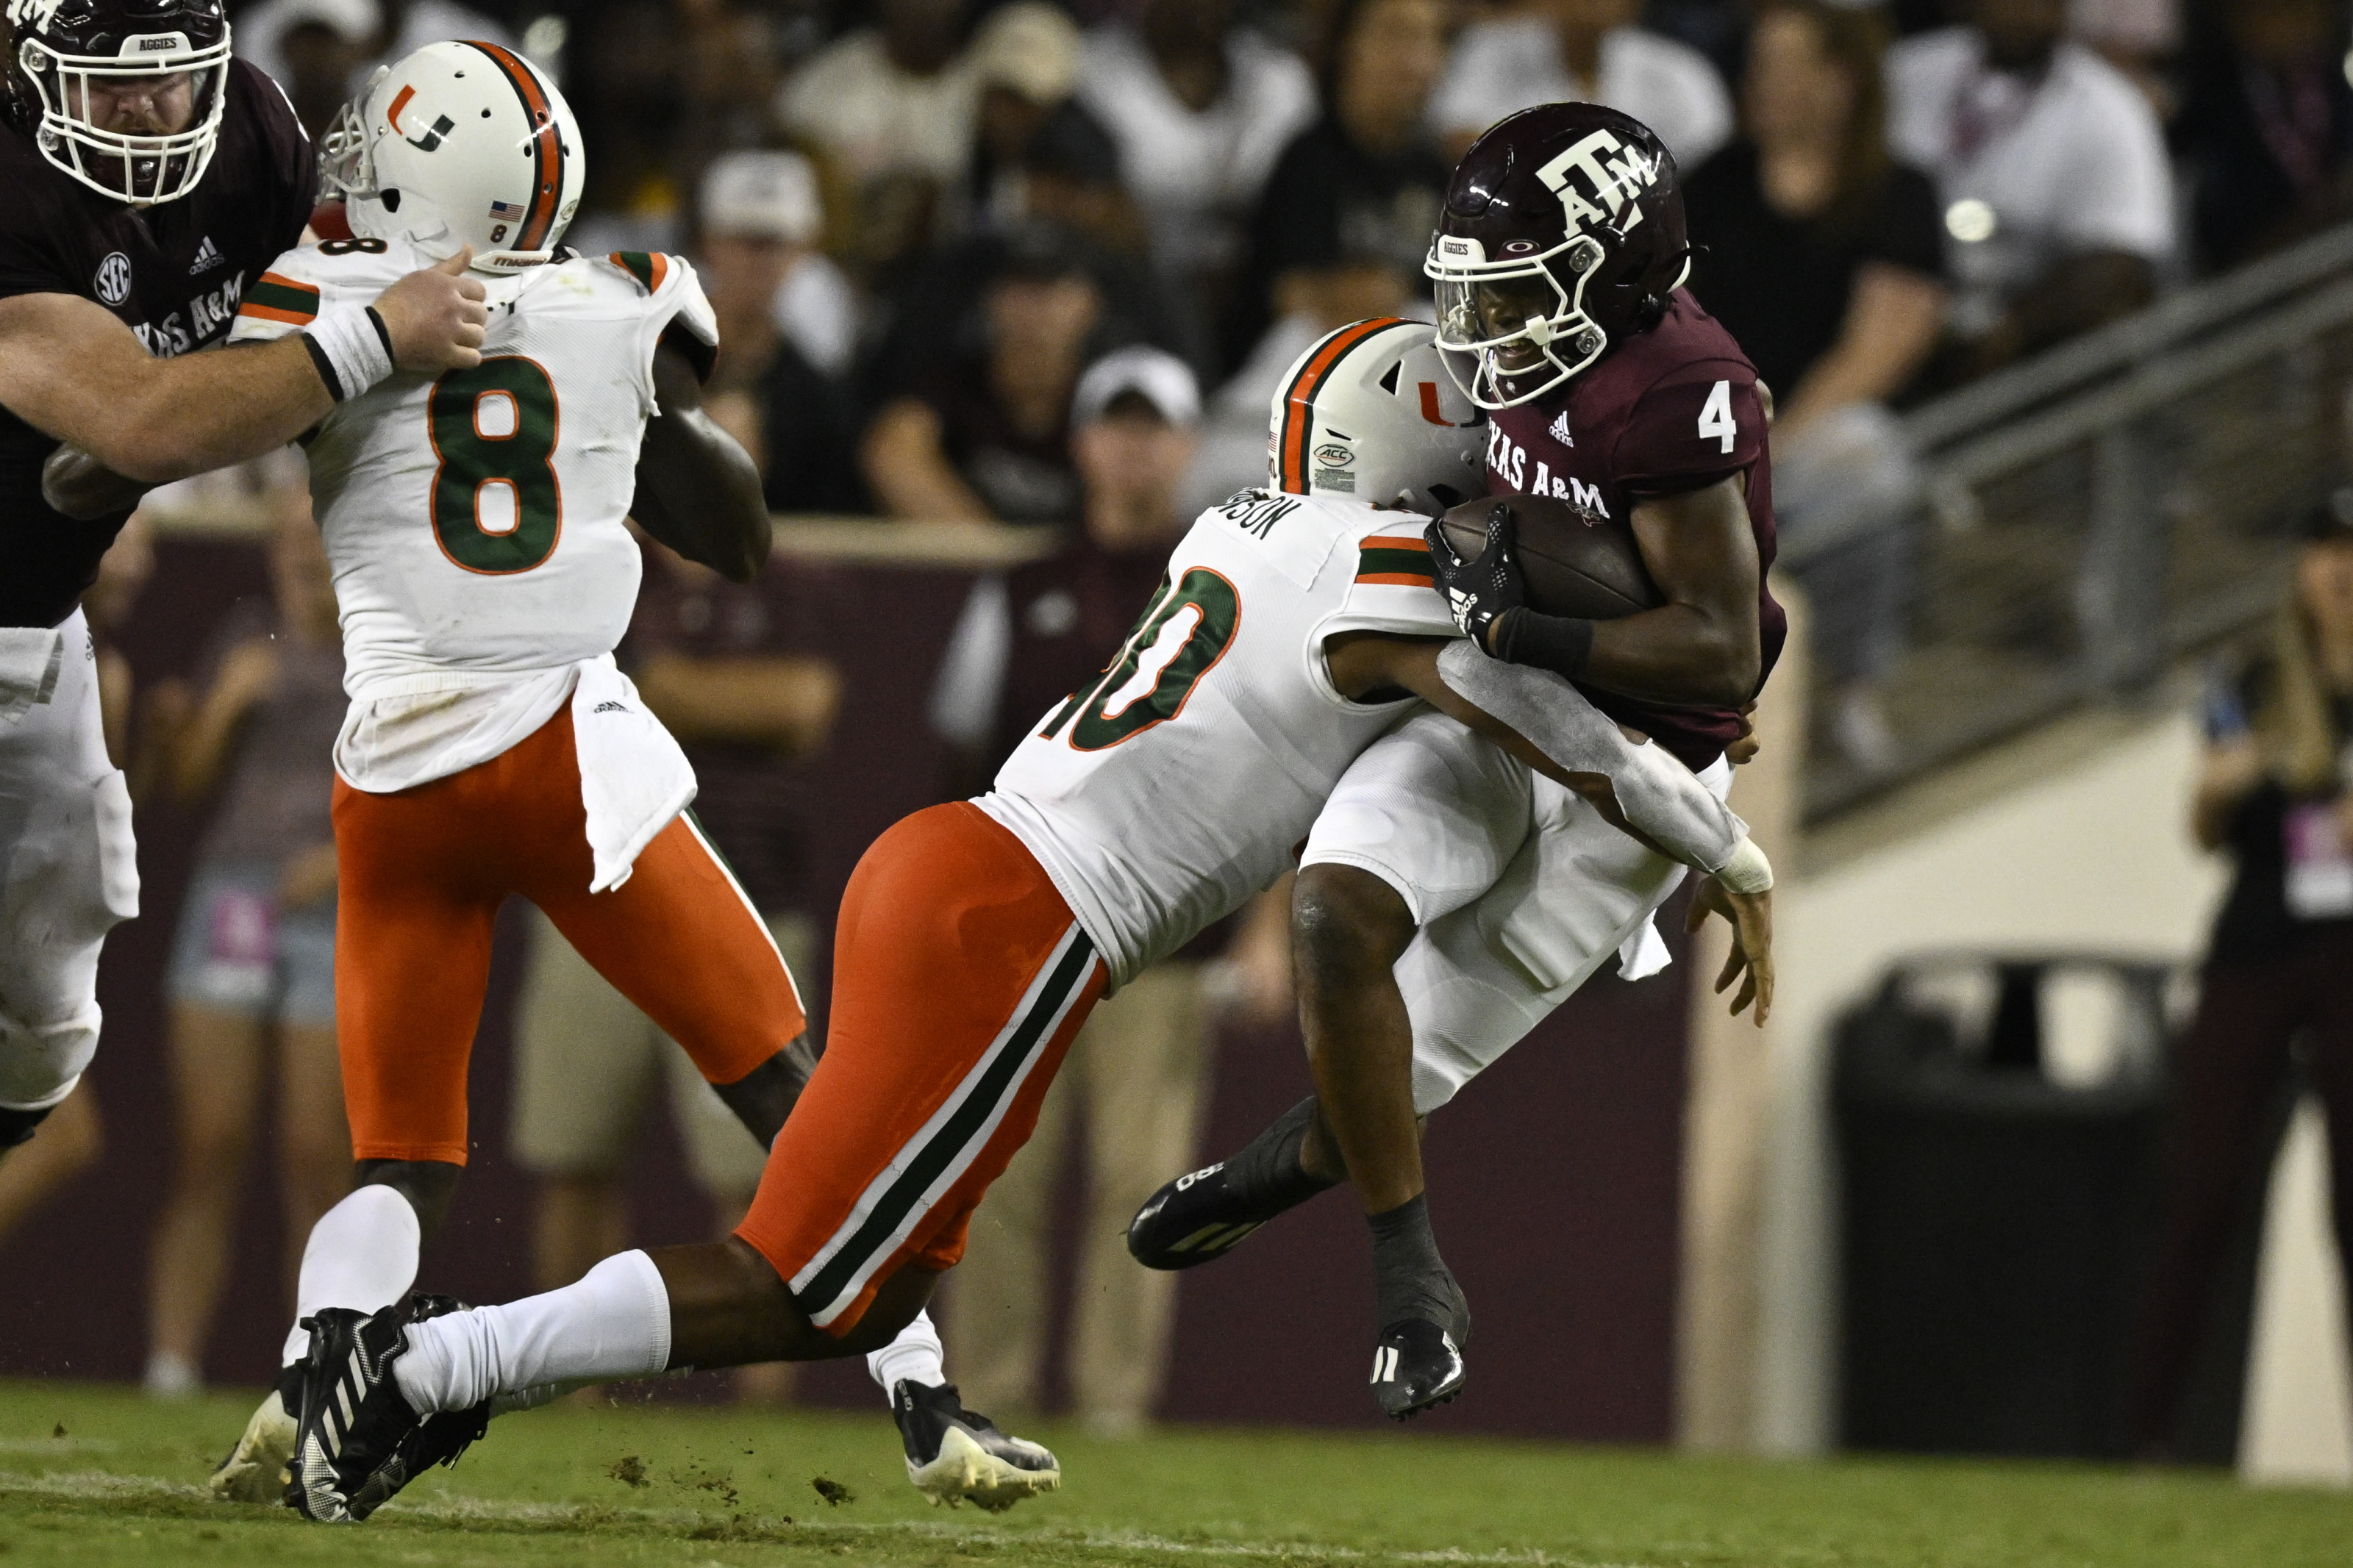 HOW TO WATCH: Texas A&M Football vs. Miami